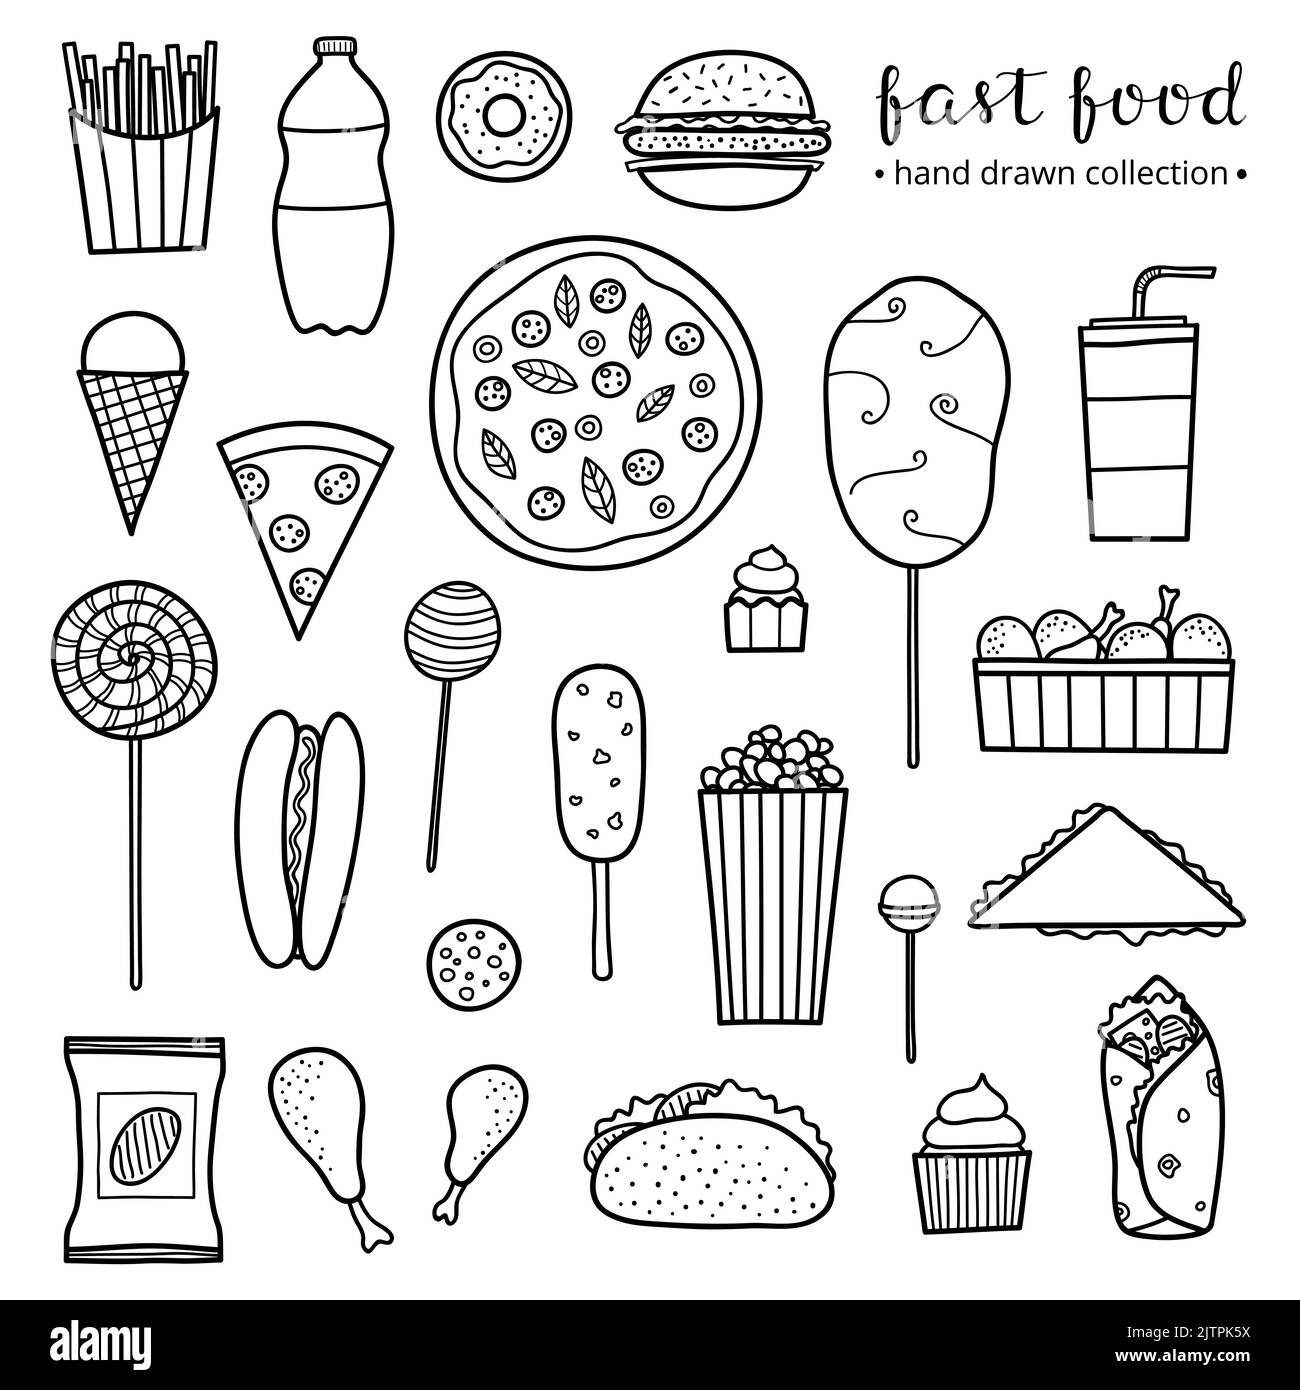 Collection of hand drawn outline fast food meals including pizza, burger, ice cream, cake, hot dog, chicken, taco, cotton candy, lemonade, chips, frie Stock Vector